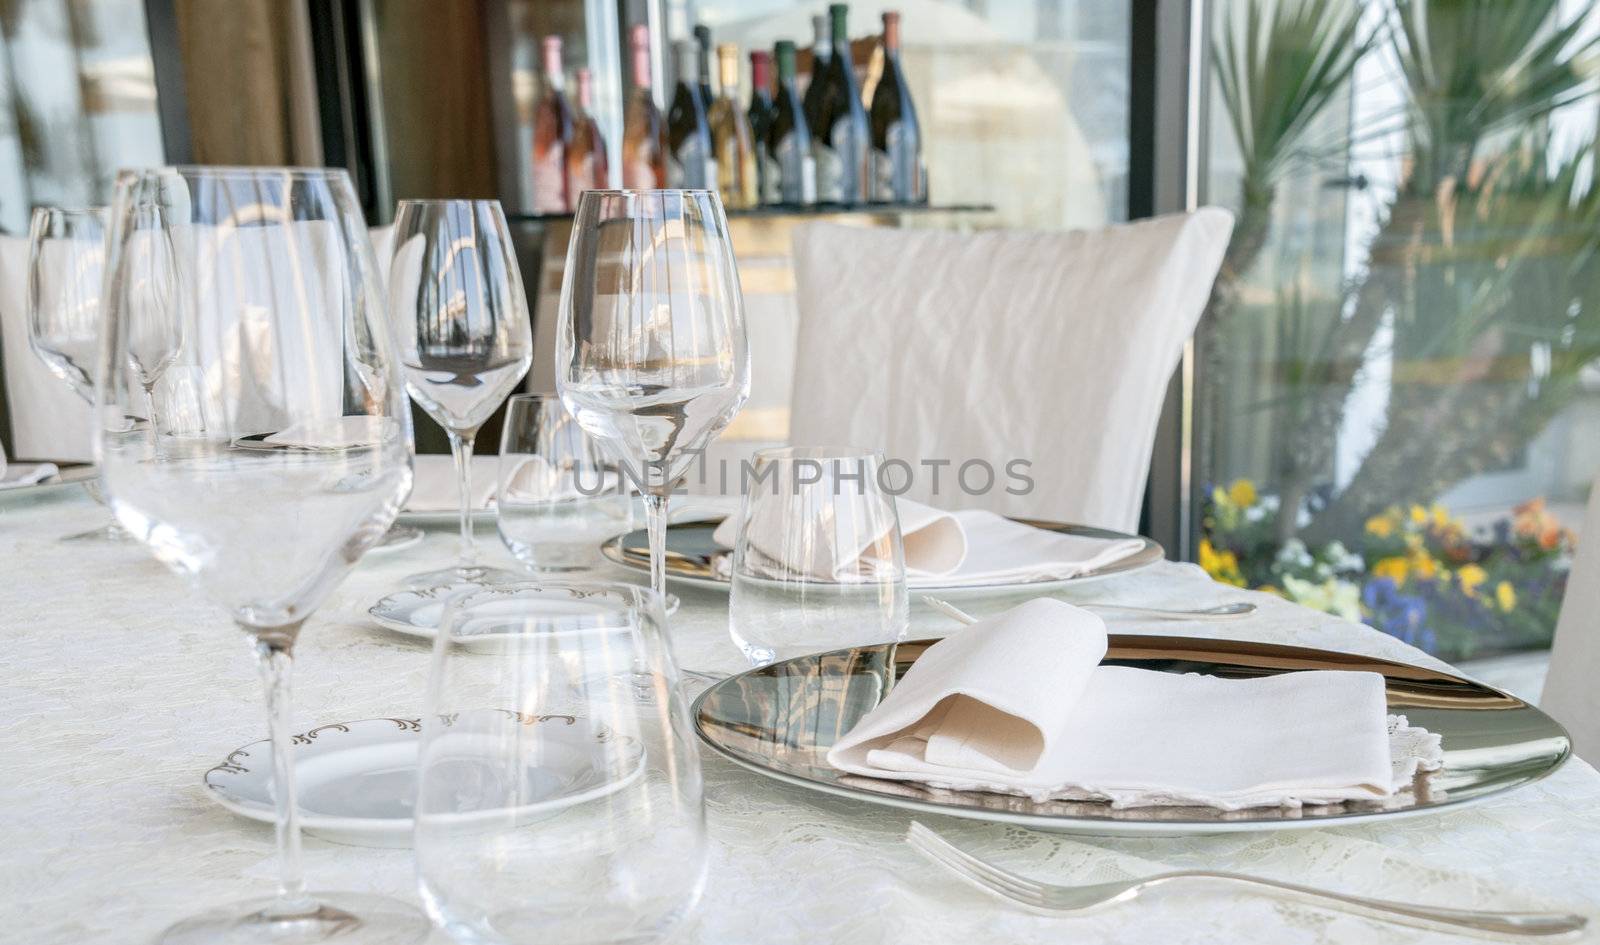 Wedding catering with plate and cutlery disposition on the table